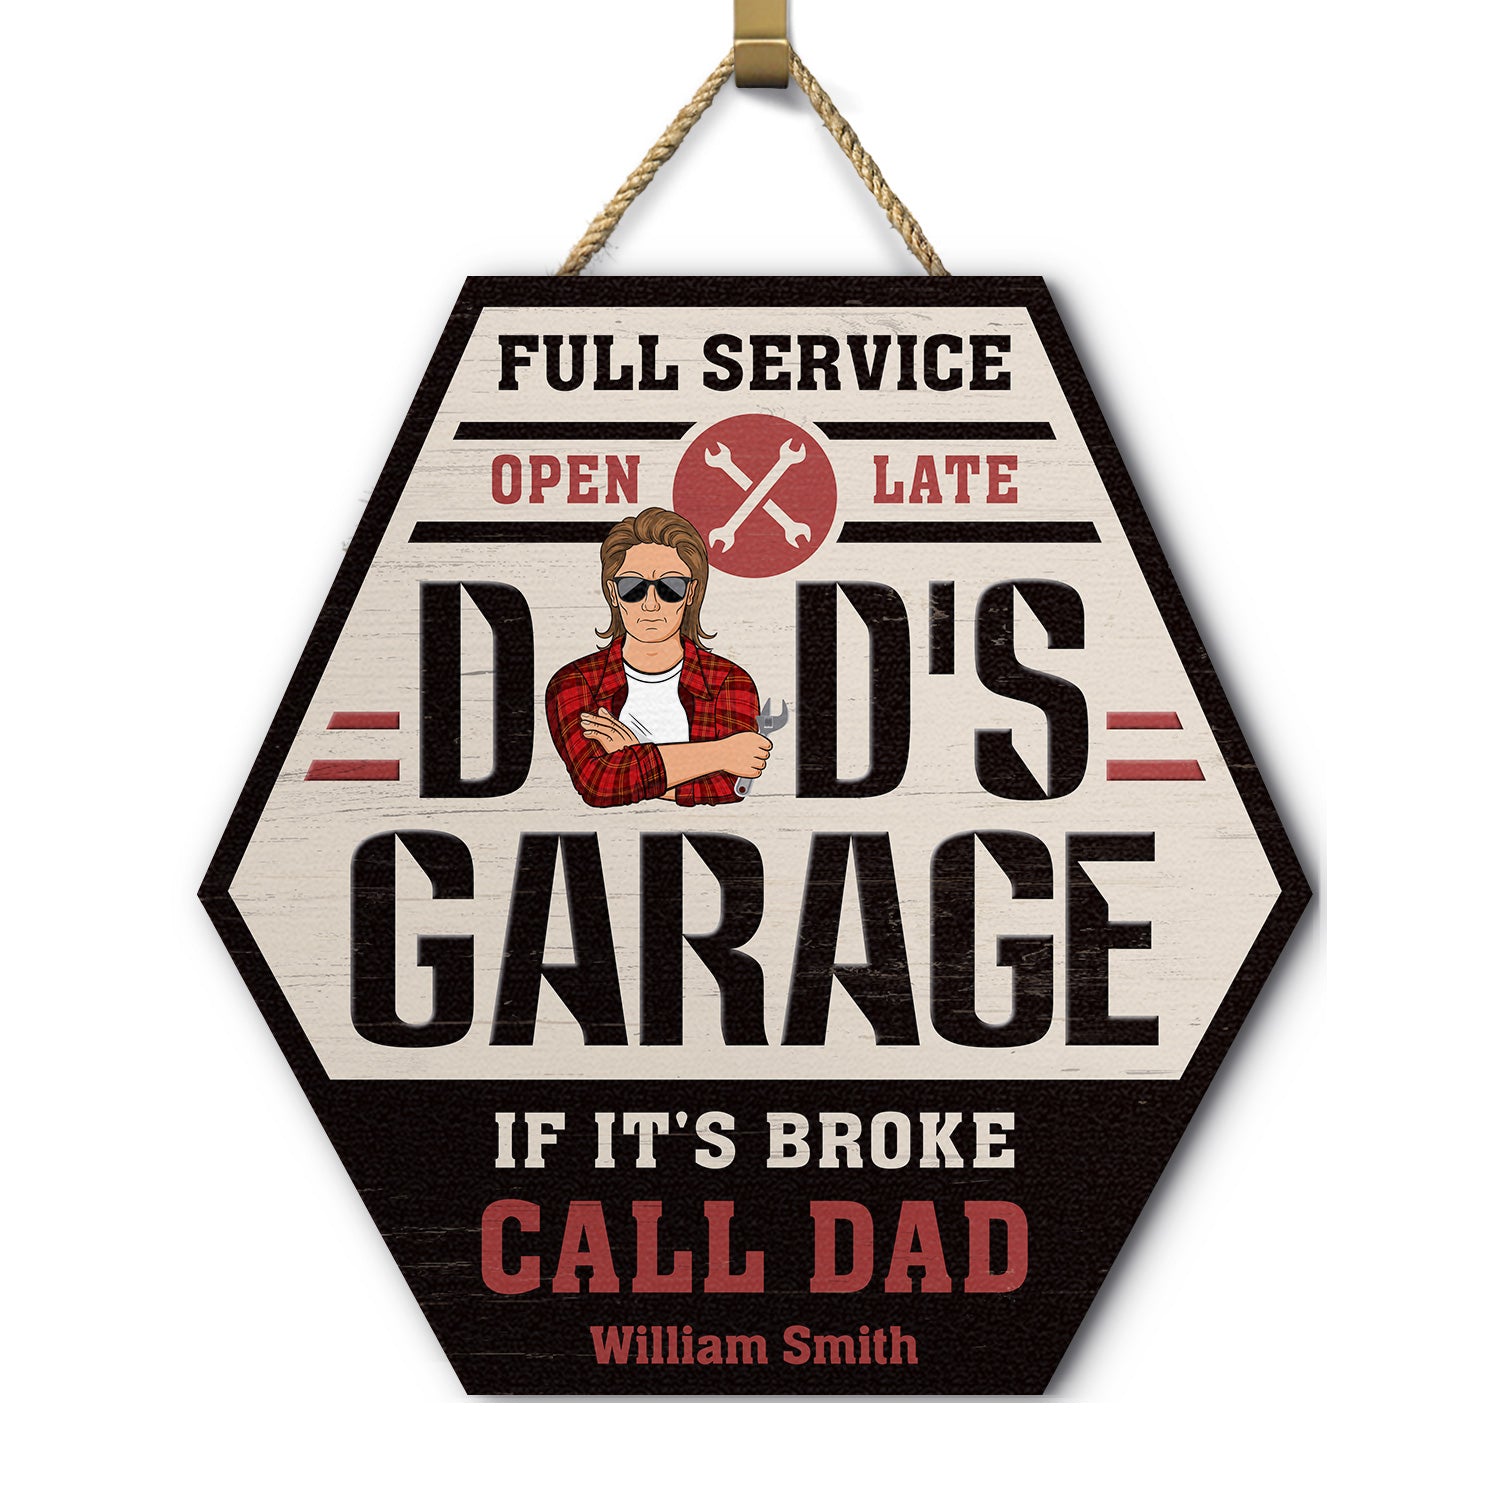 If It's Broke Call Dad - Garage Decor For Father - Personalized Custom Shaped Wood Sign